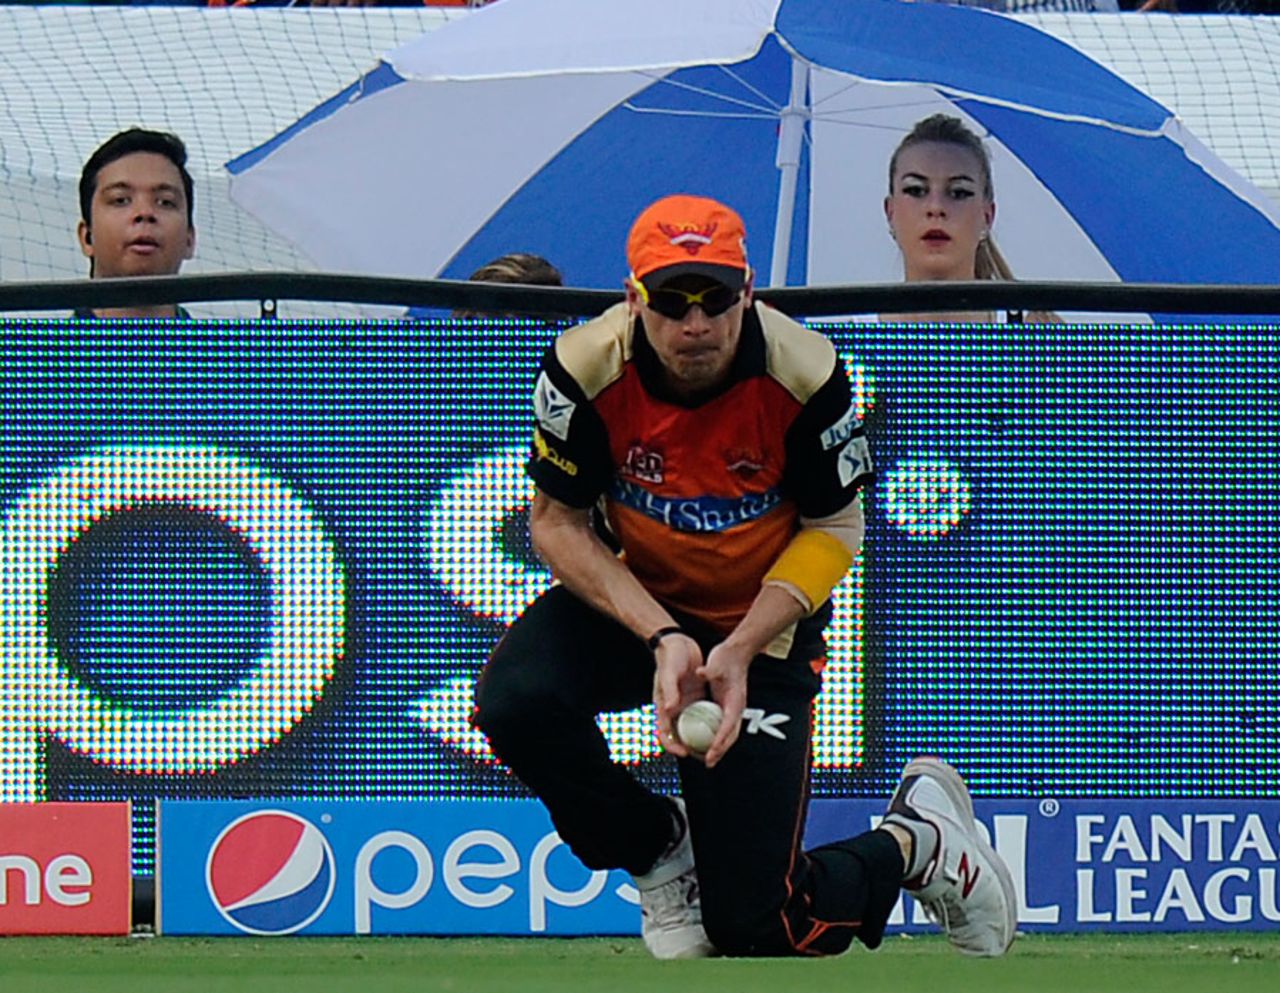 Dale Steyn completes the catch to dismiss Yuvraj Singh, Sunrisers Hyderabad v Royal Challengers Bangalore, IPL 2014, Hyderabad, May 20, 2014